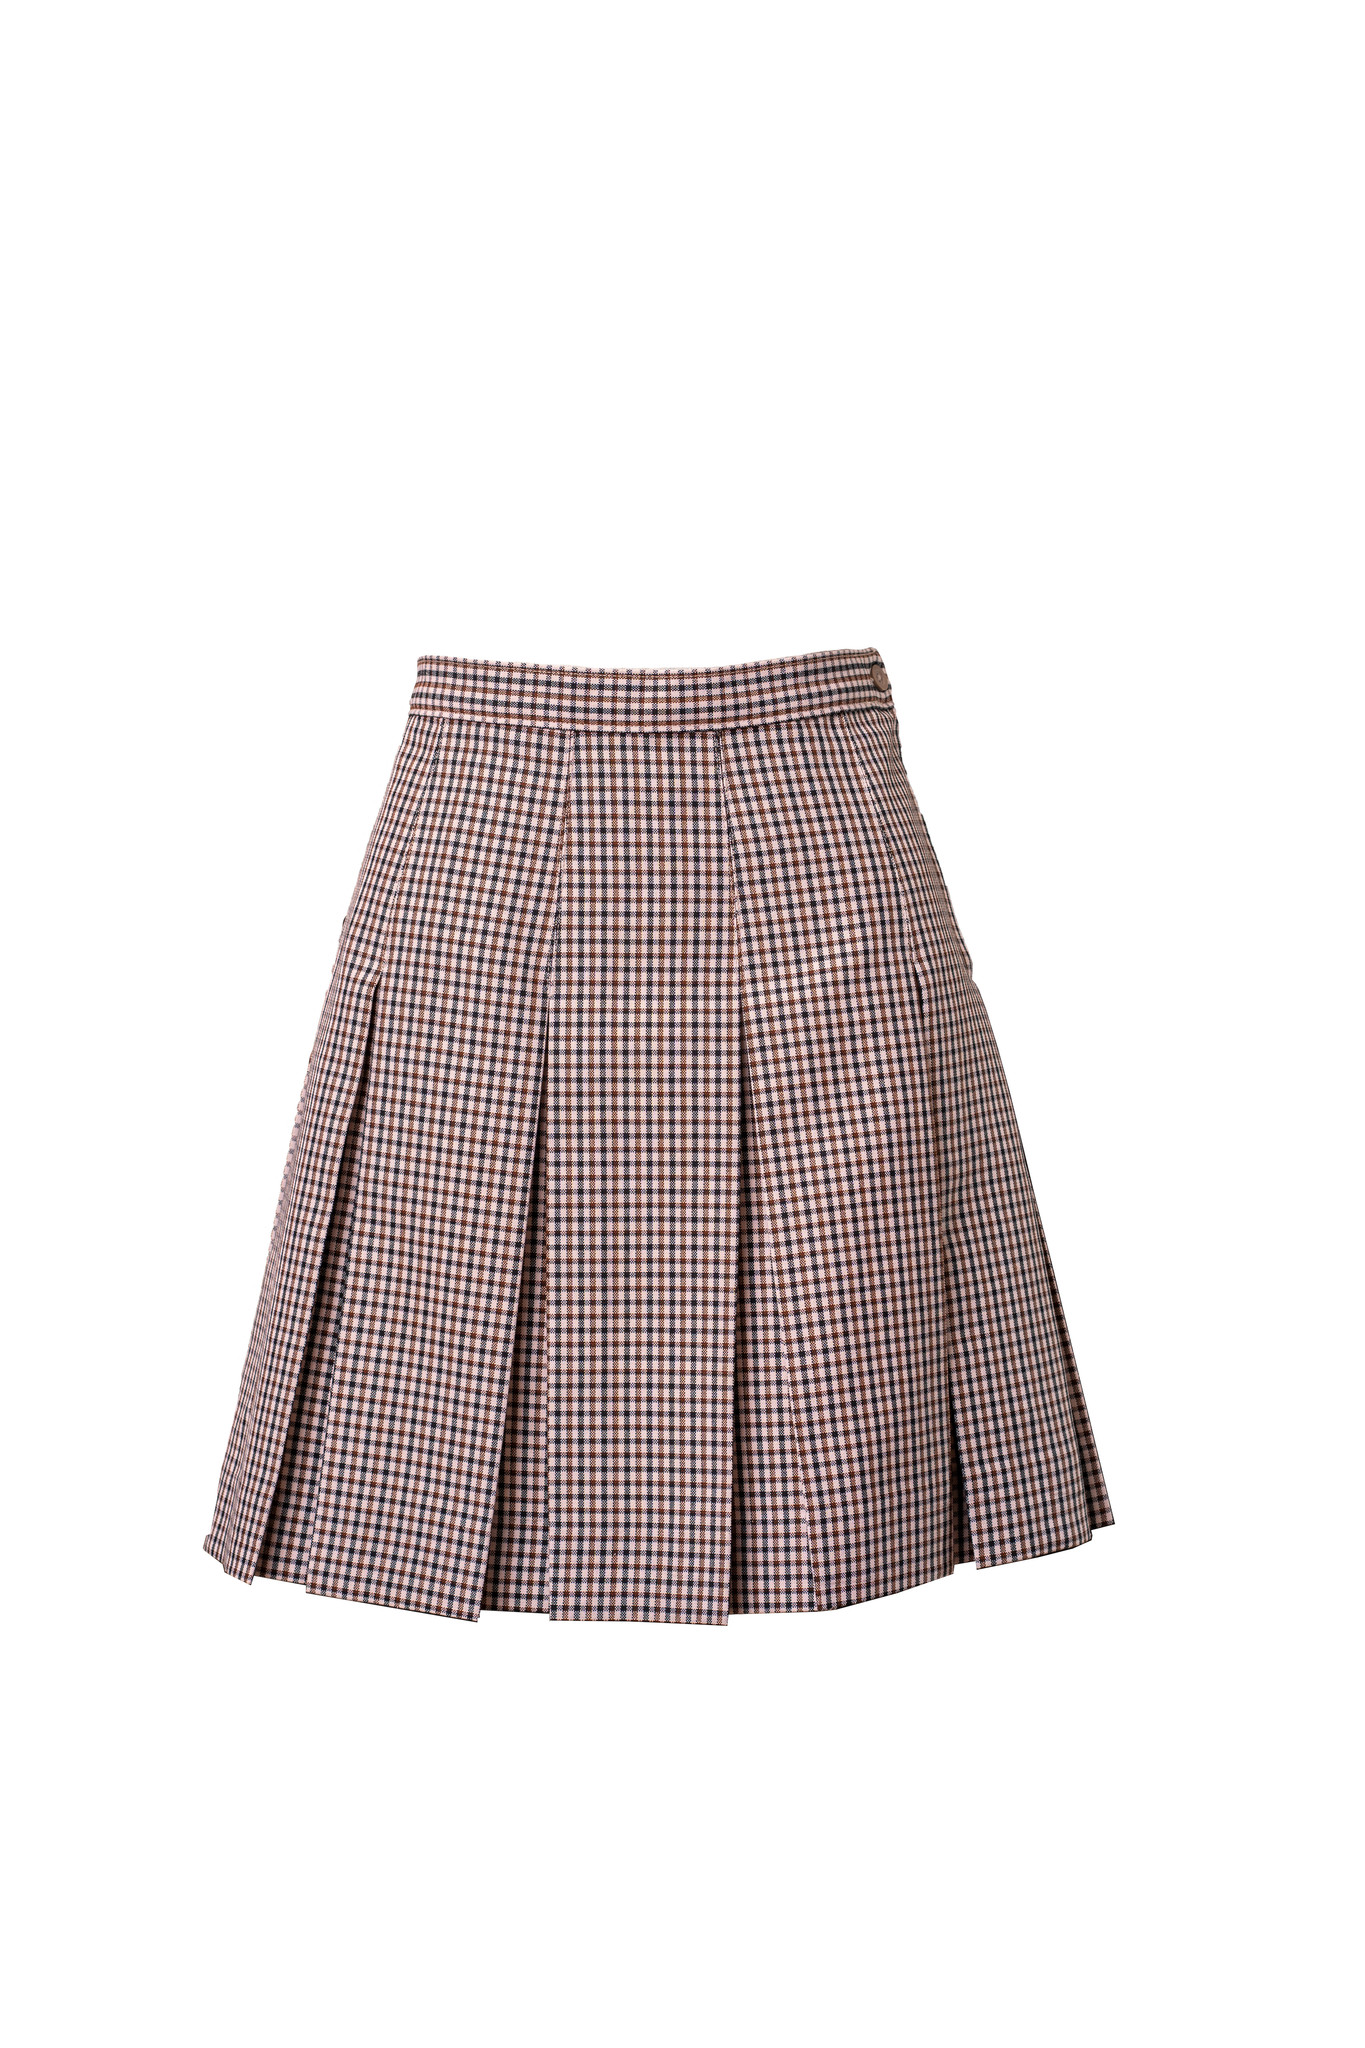 Mayfield Brown Plaid Skirt